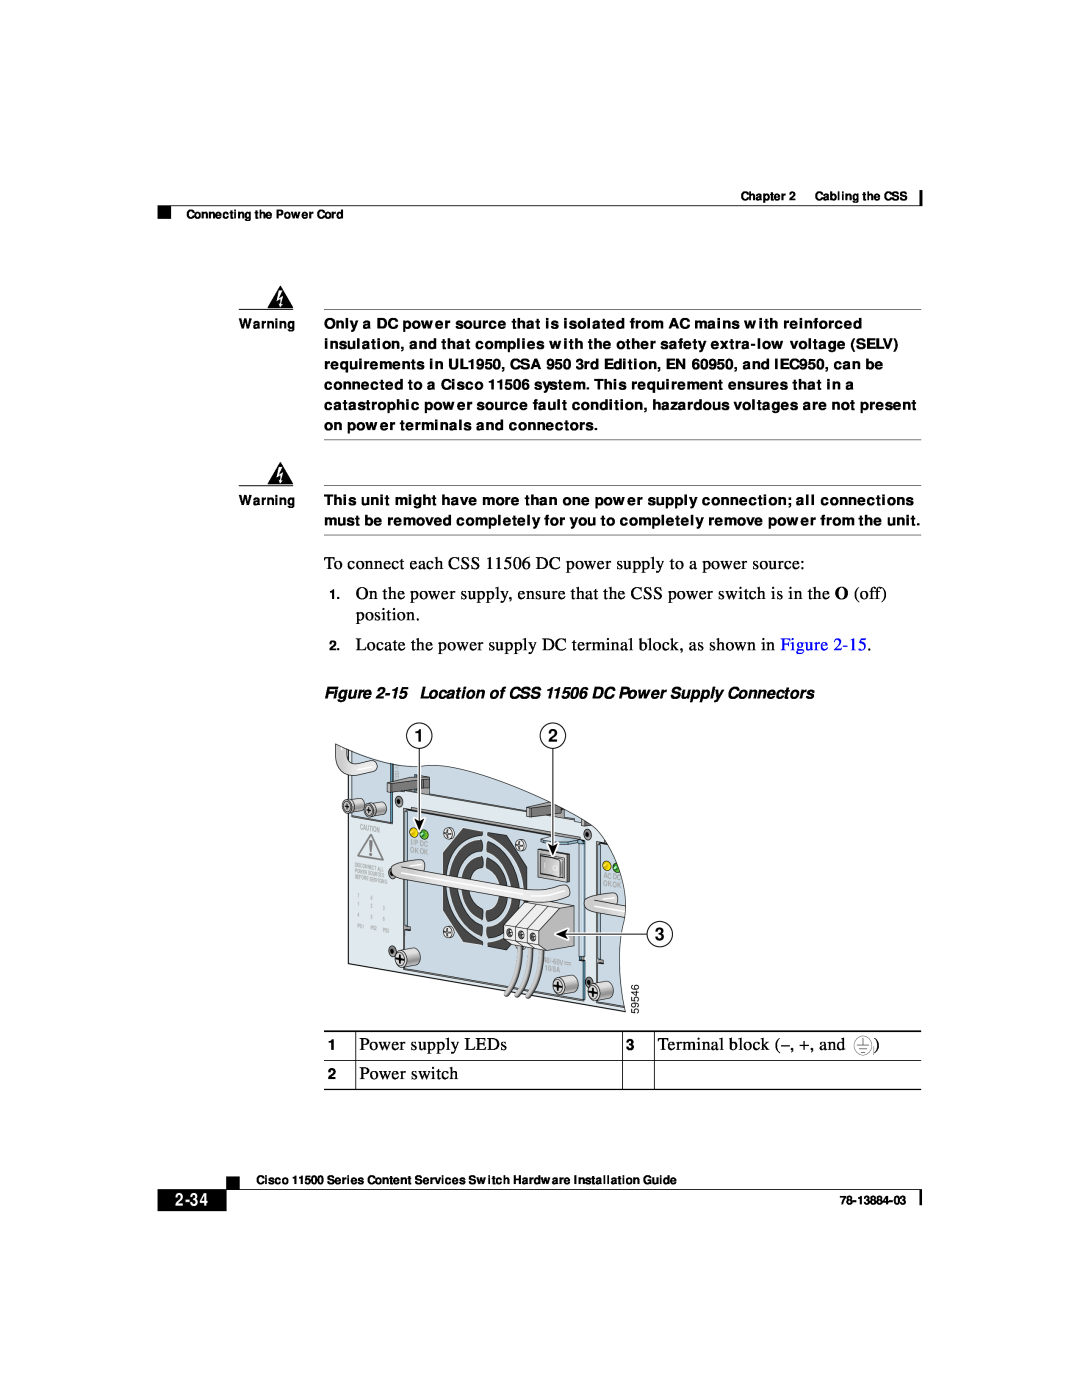 Cisco Systems 11500 Series manual 2-34, 15 Location of CSS 11506 DC Power Supply Connectors, I/P Dc, Ok Ok 